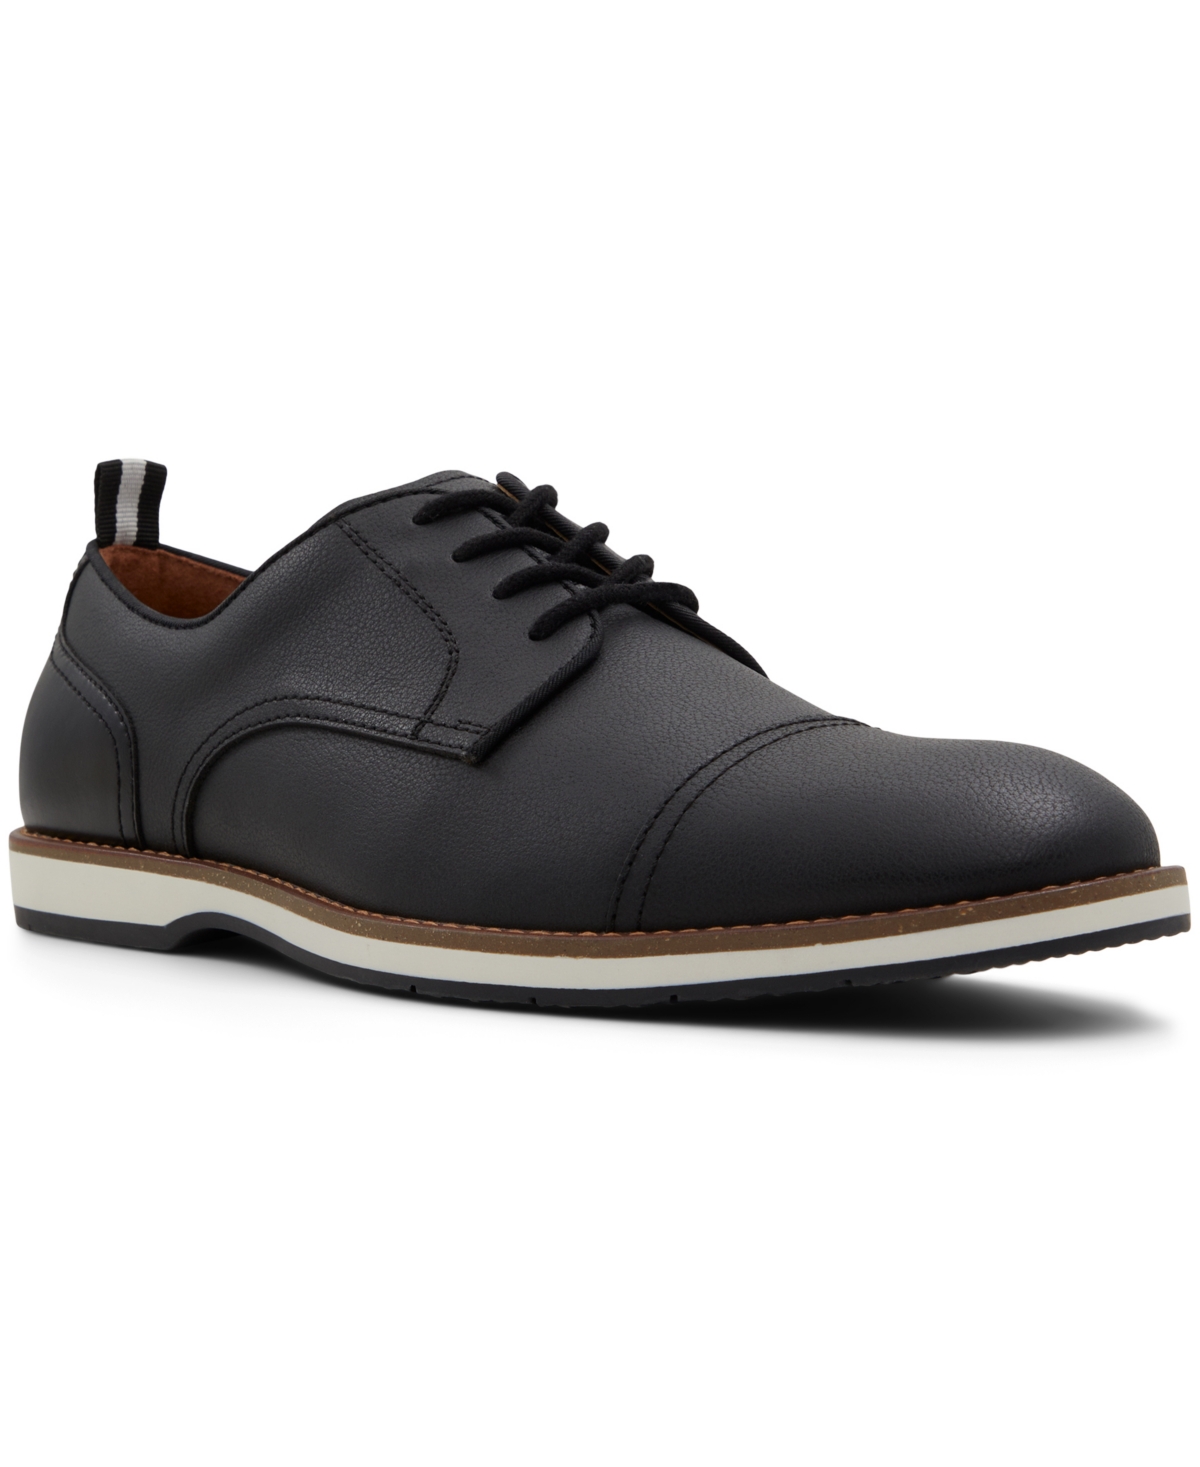 CALL IT SPRING MEN'S CASTELO DERBY LACE-UP SHOES